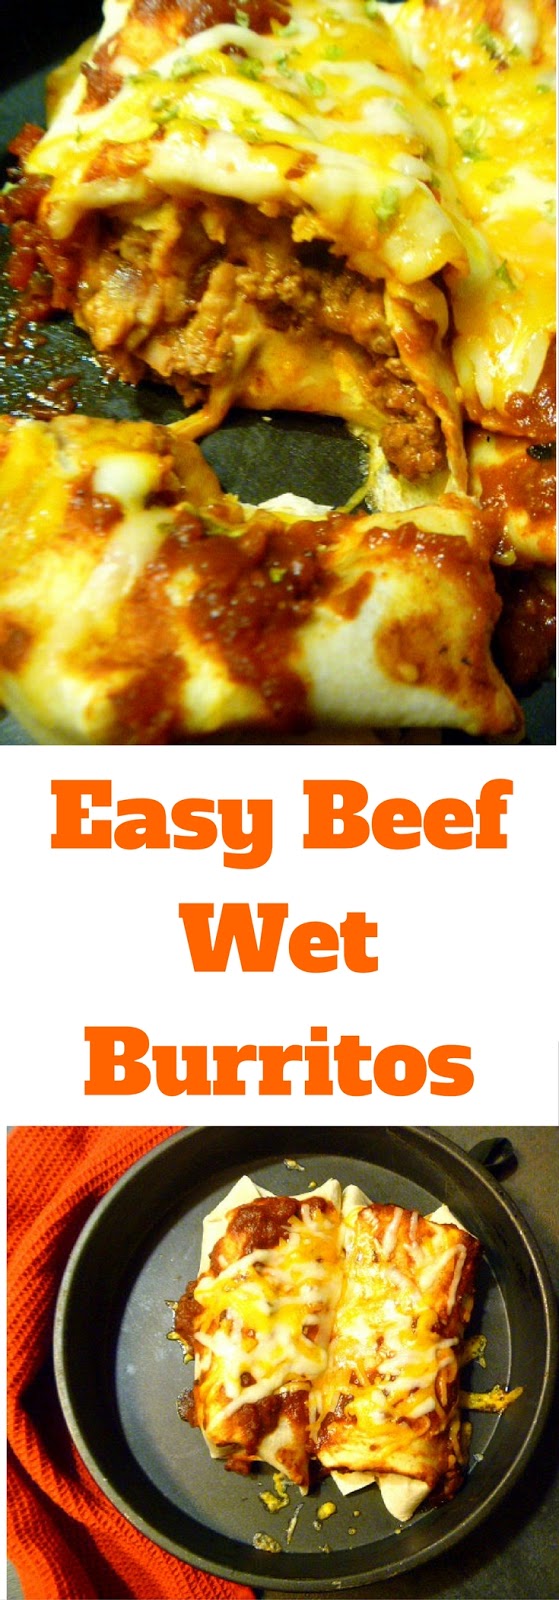 Slice of Southern: Easy Beef Wet Burritos